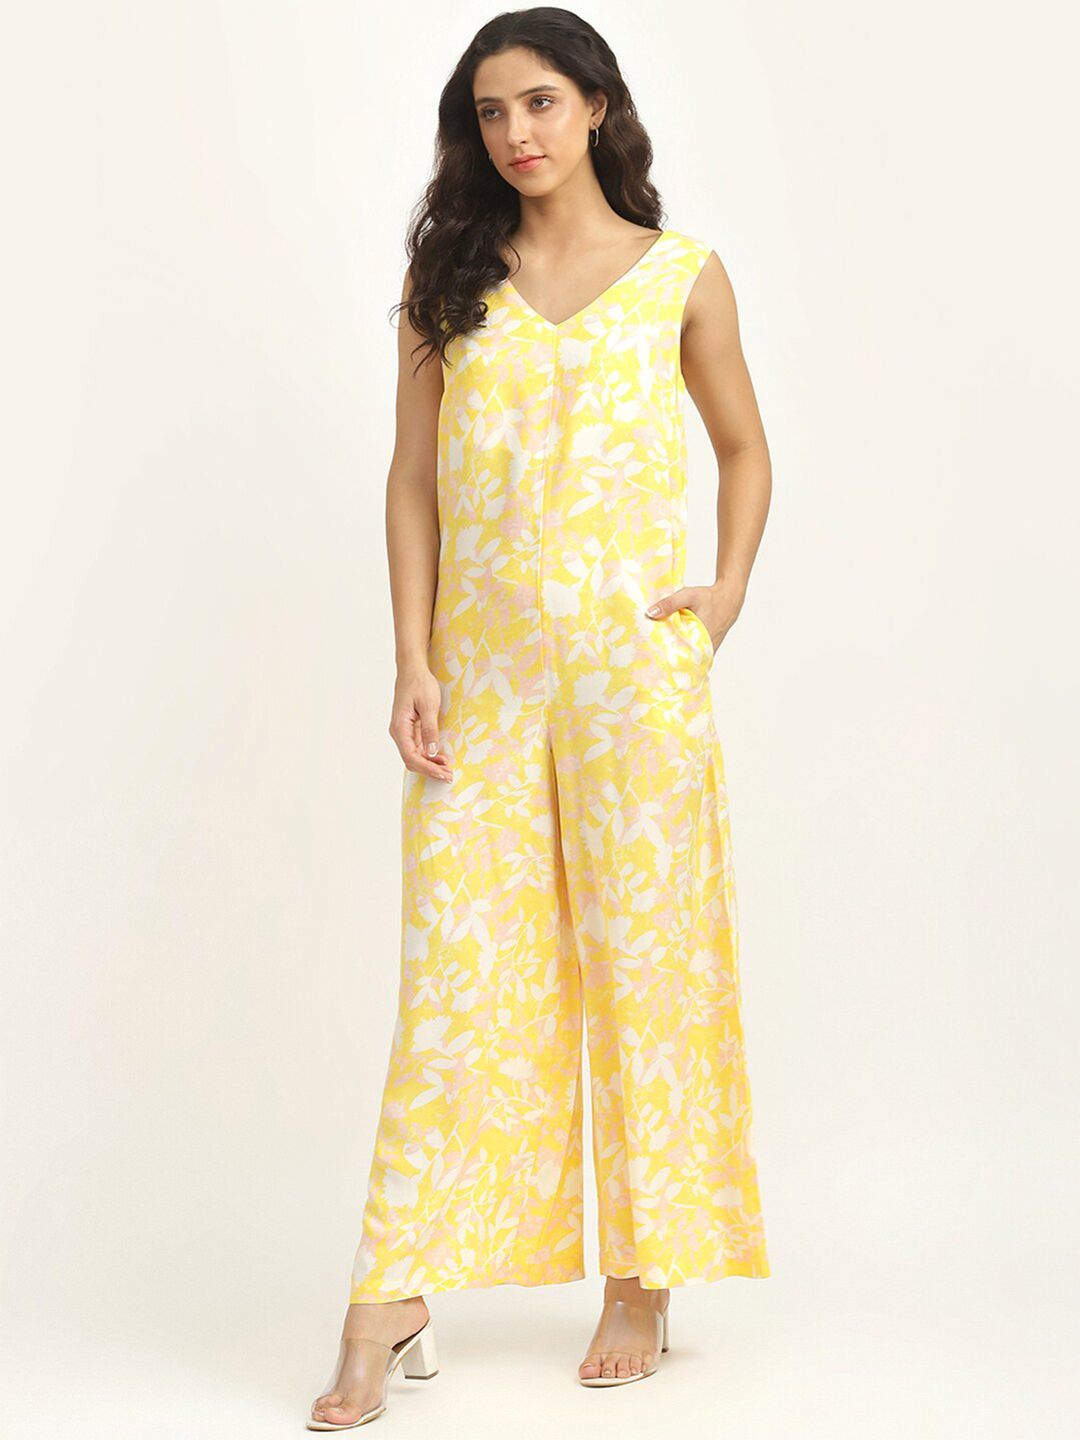 United Colors of Benetton Blue Printed Basic Jumpsuit Price in India